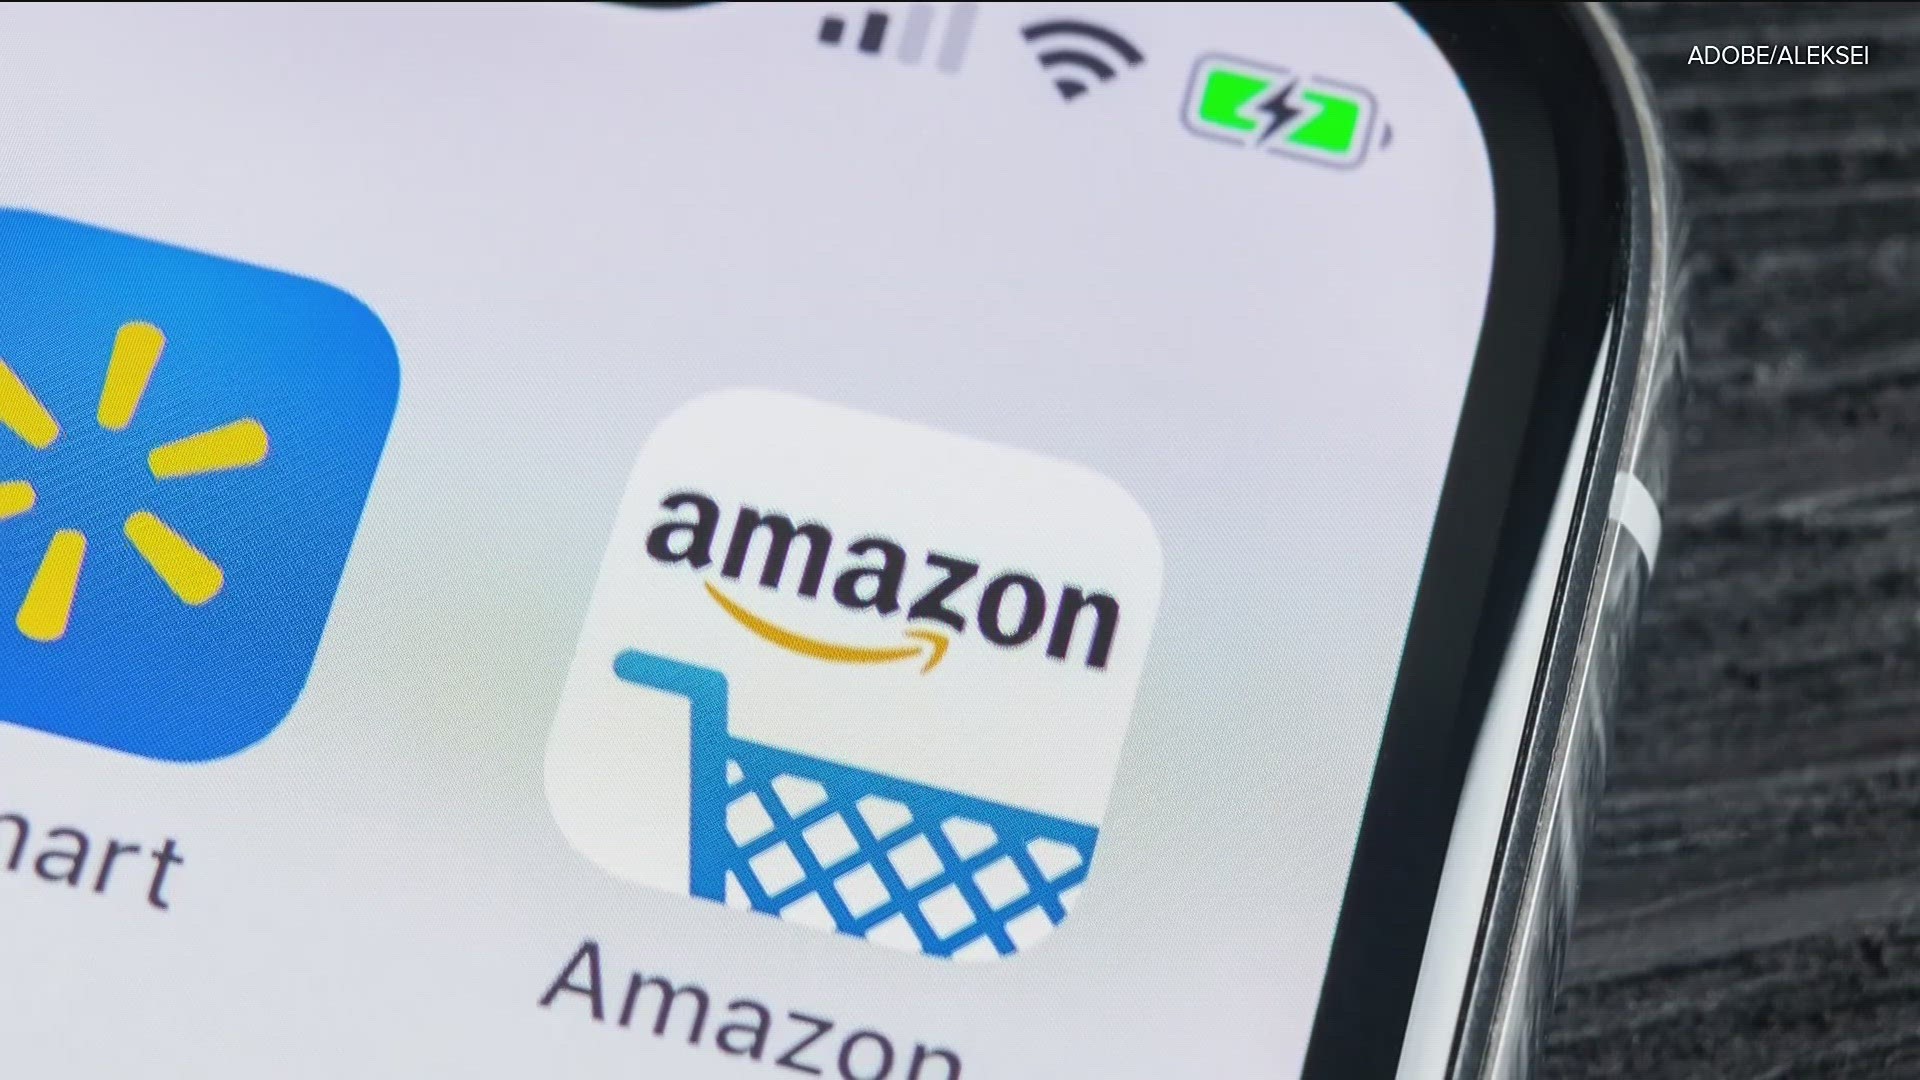 Many say they're getting text alerts saying their Amazon account has been locked.